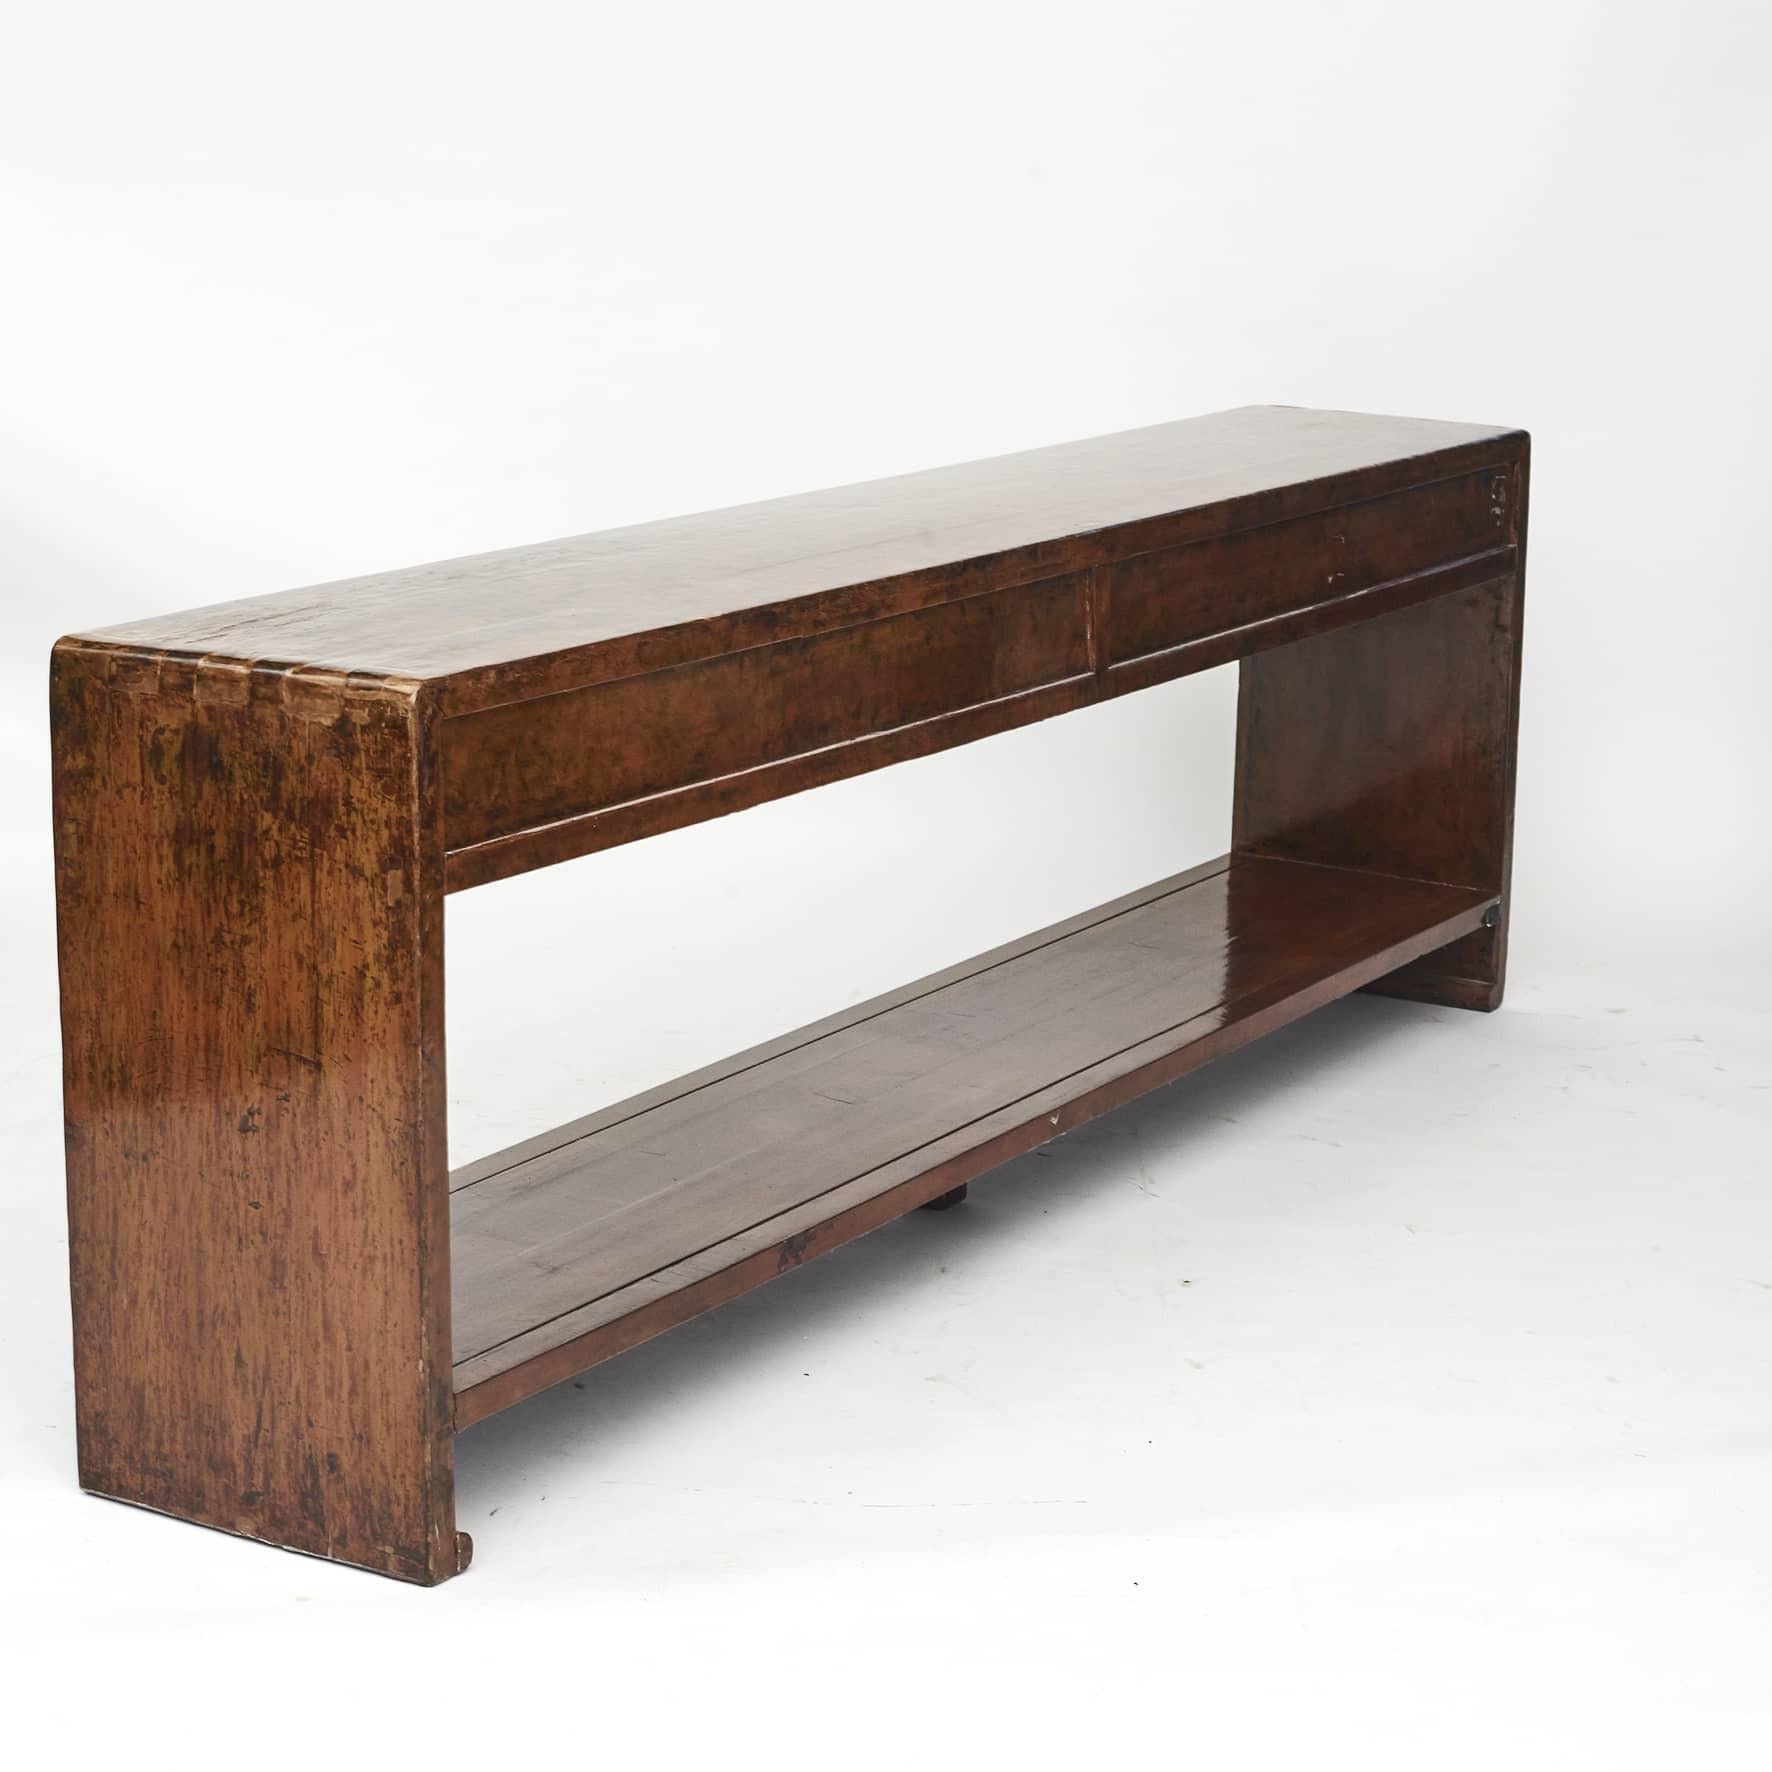 Decorative art deco console table ( 177 cm long ).
Freestanding with 4 drawers and underlying shelf.

Lacquer with brownish cinnamon shades beautiful patina.
China 1910 - 1915.